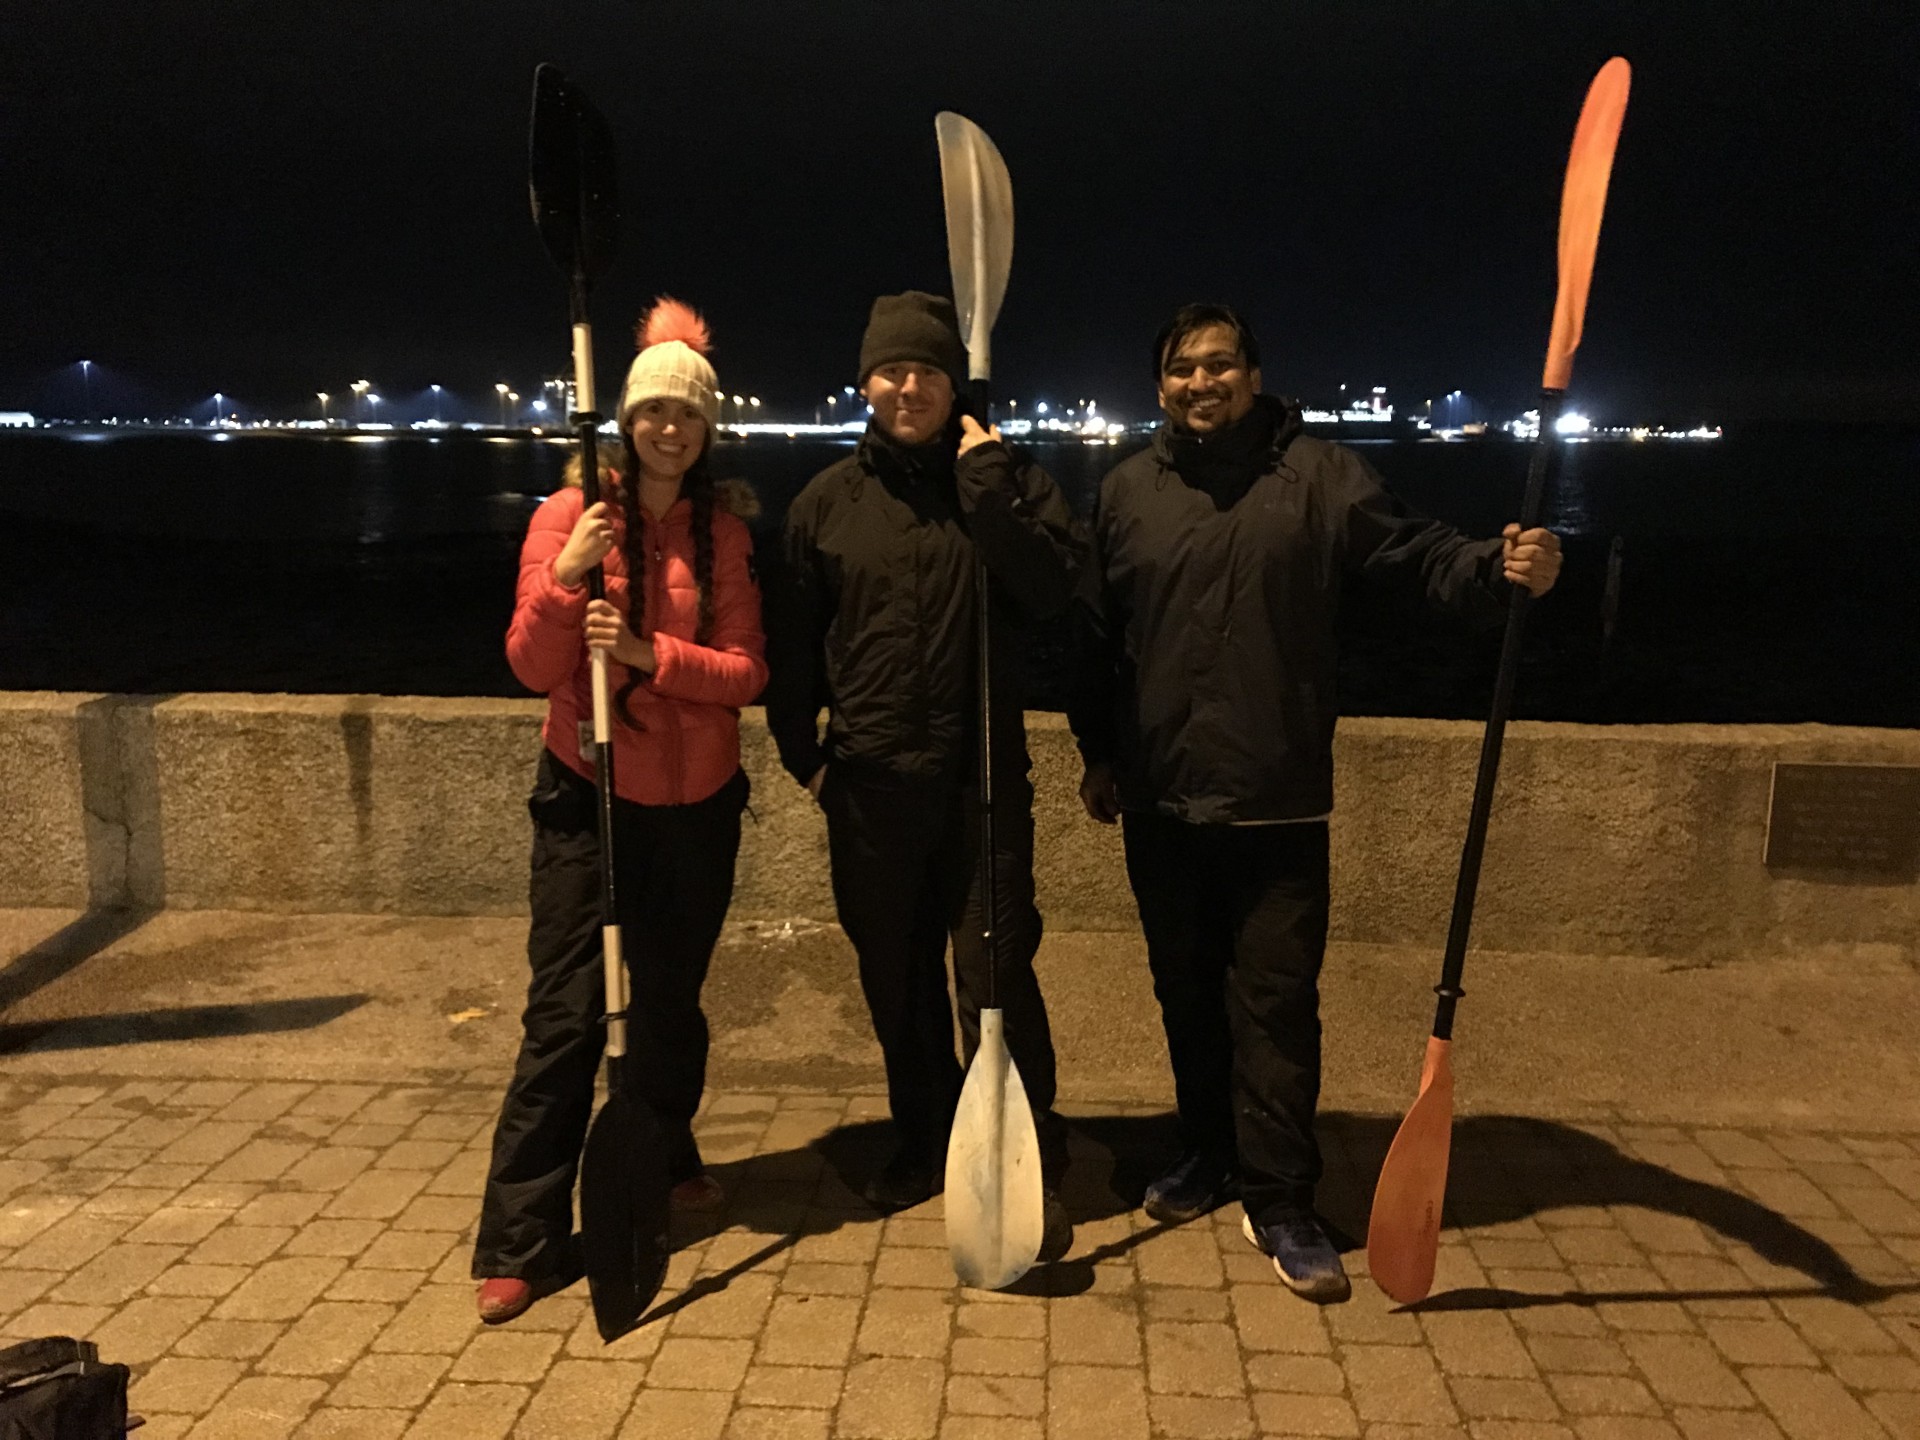 Three guests with paddles posing before the Harwich harbour fireworks display